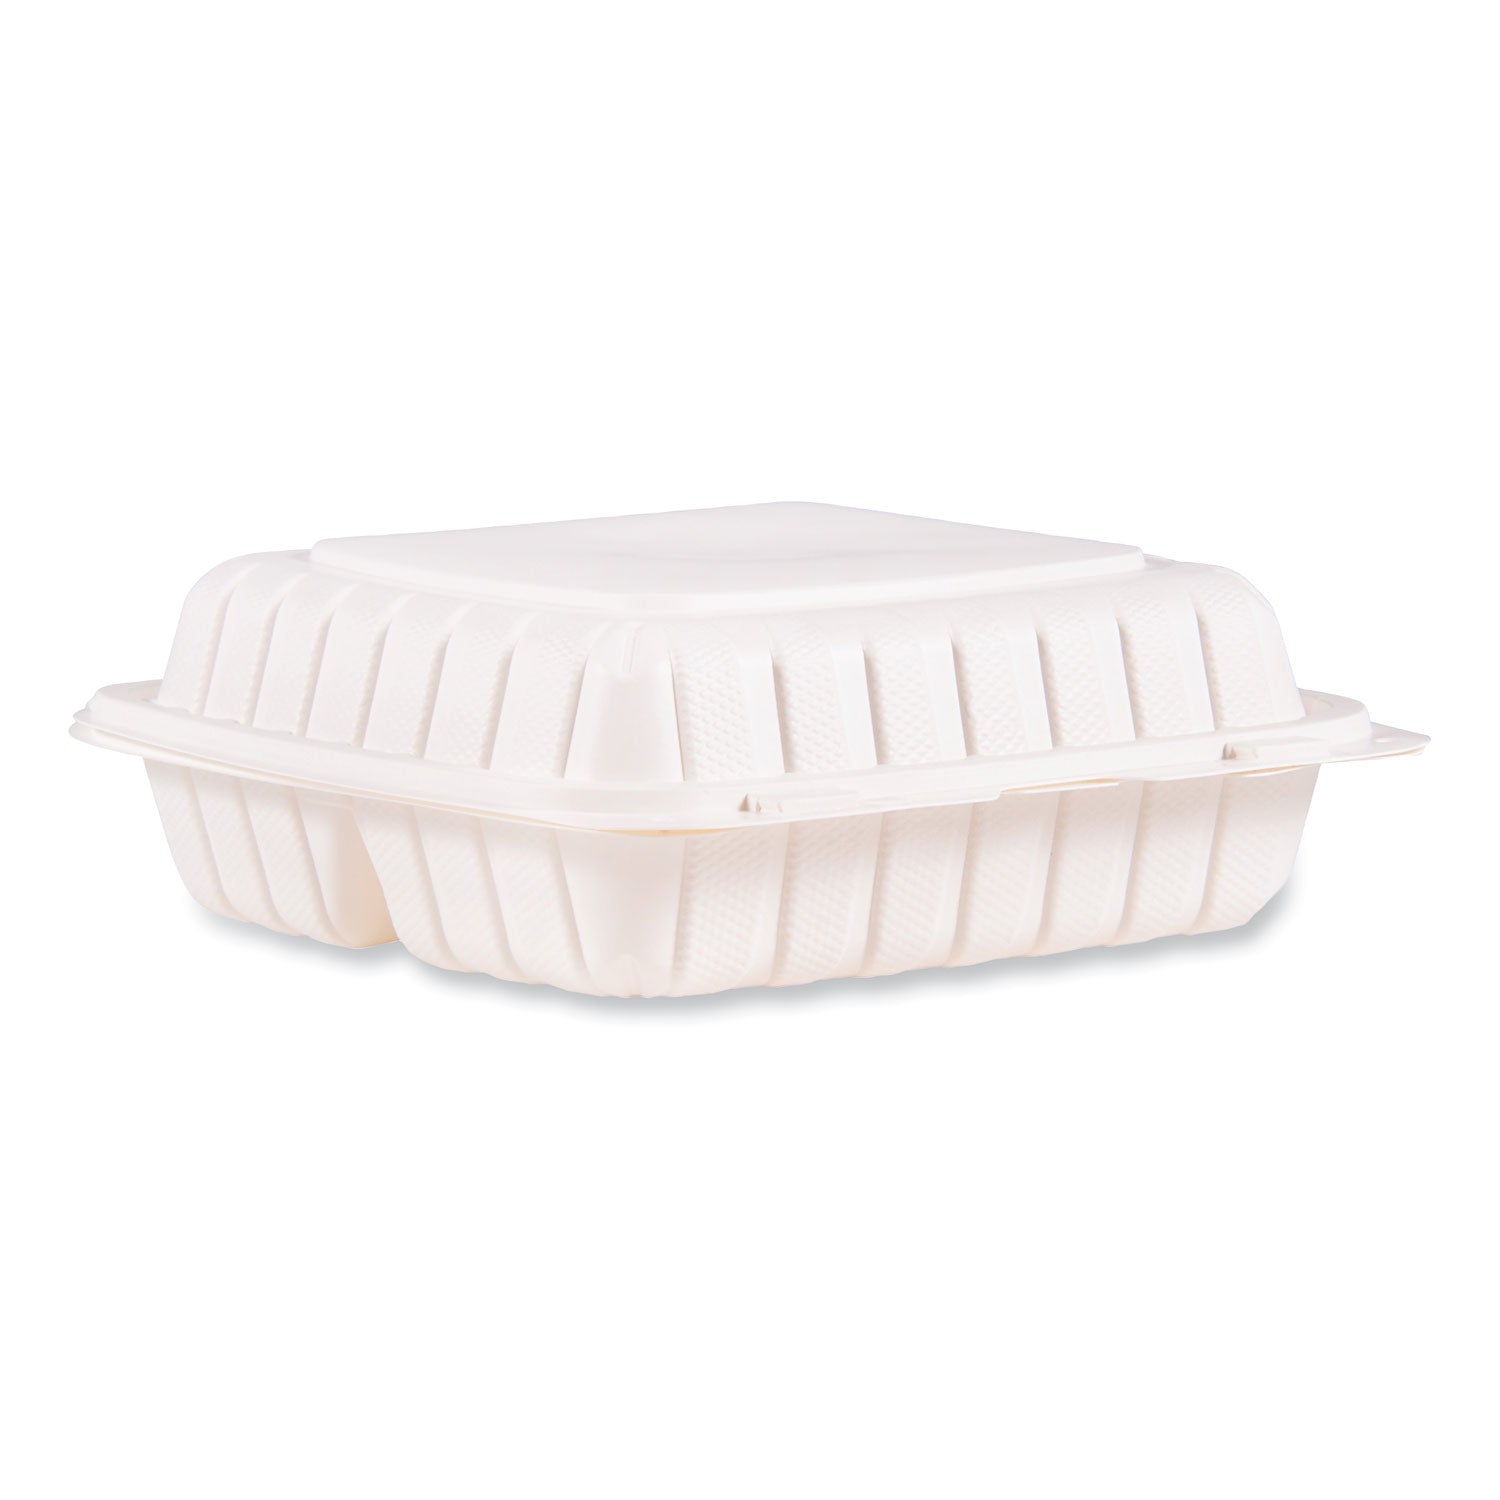 hinged-lid-containers-3-compartment-9-x-875-x-3-white-plastic-150-carton_dcc90mfppht3r - 2